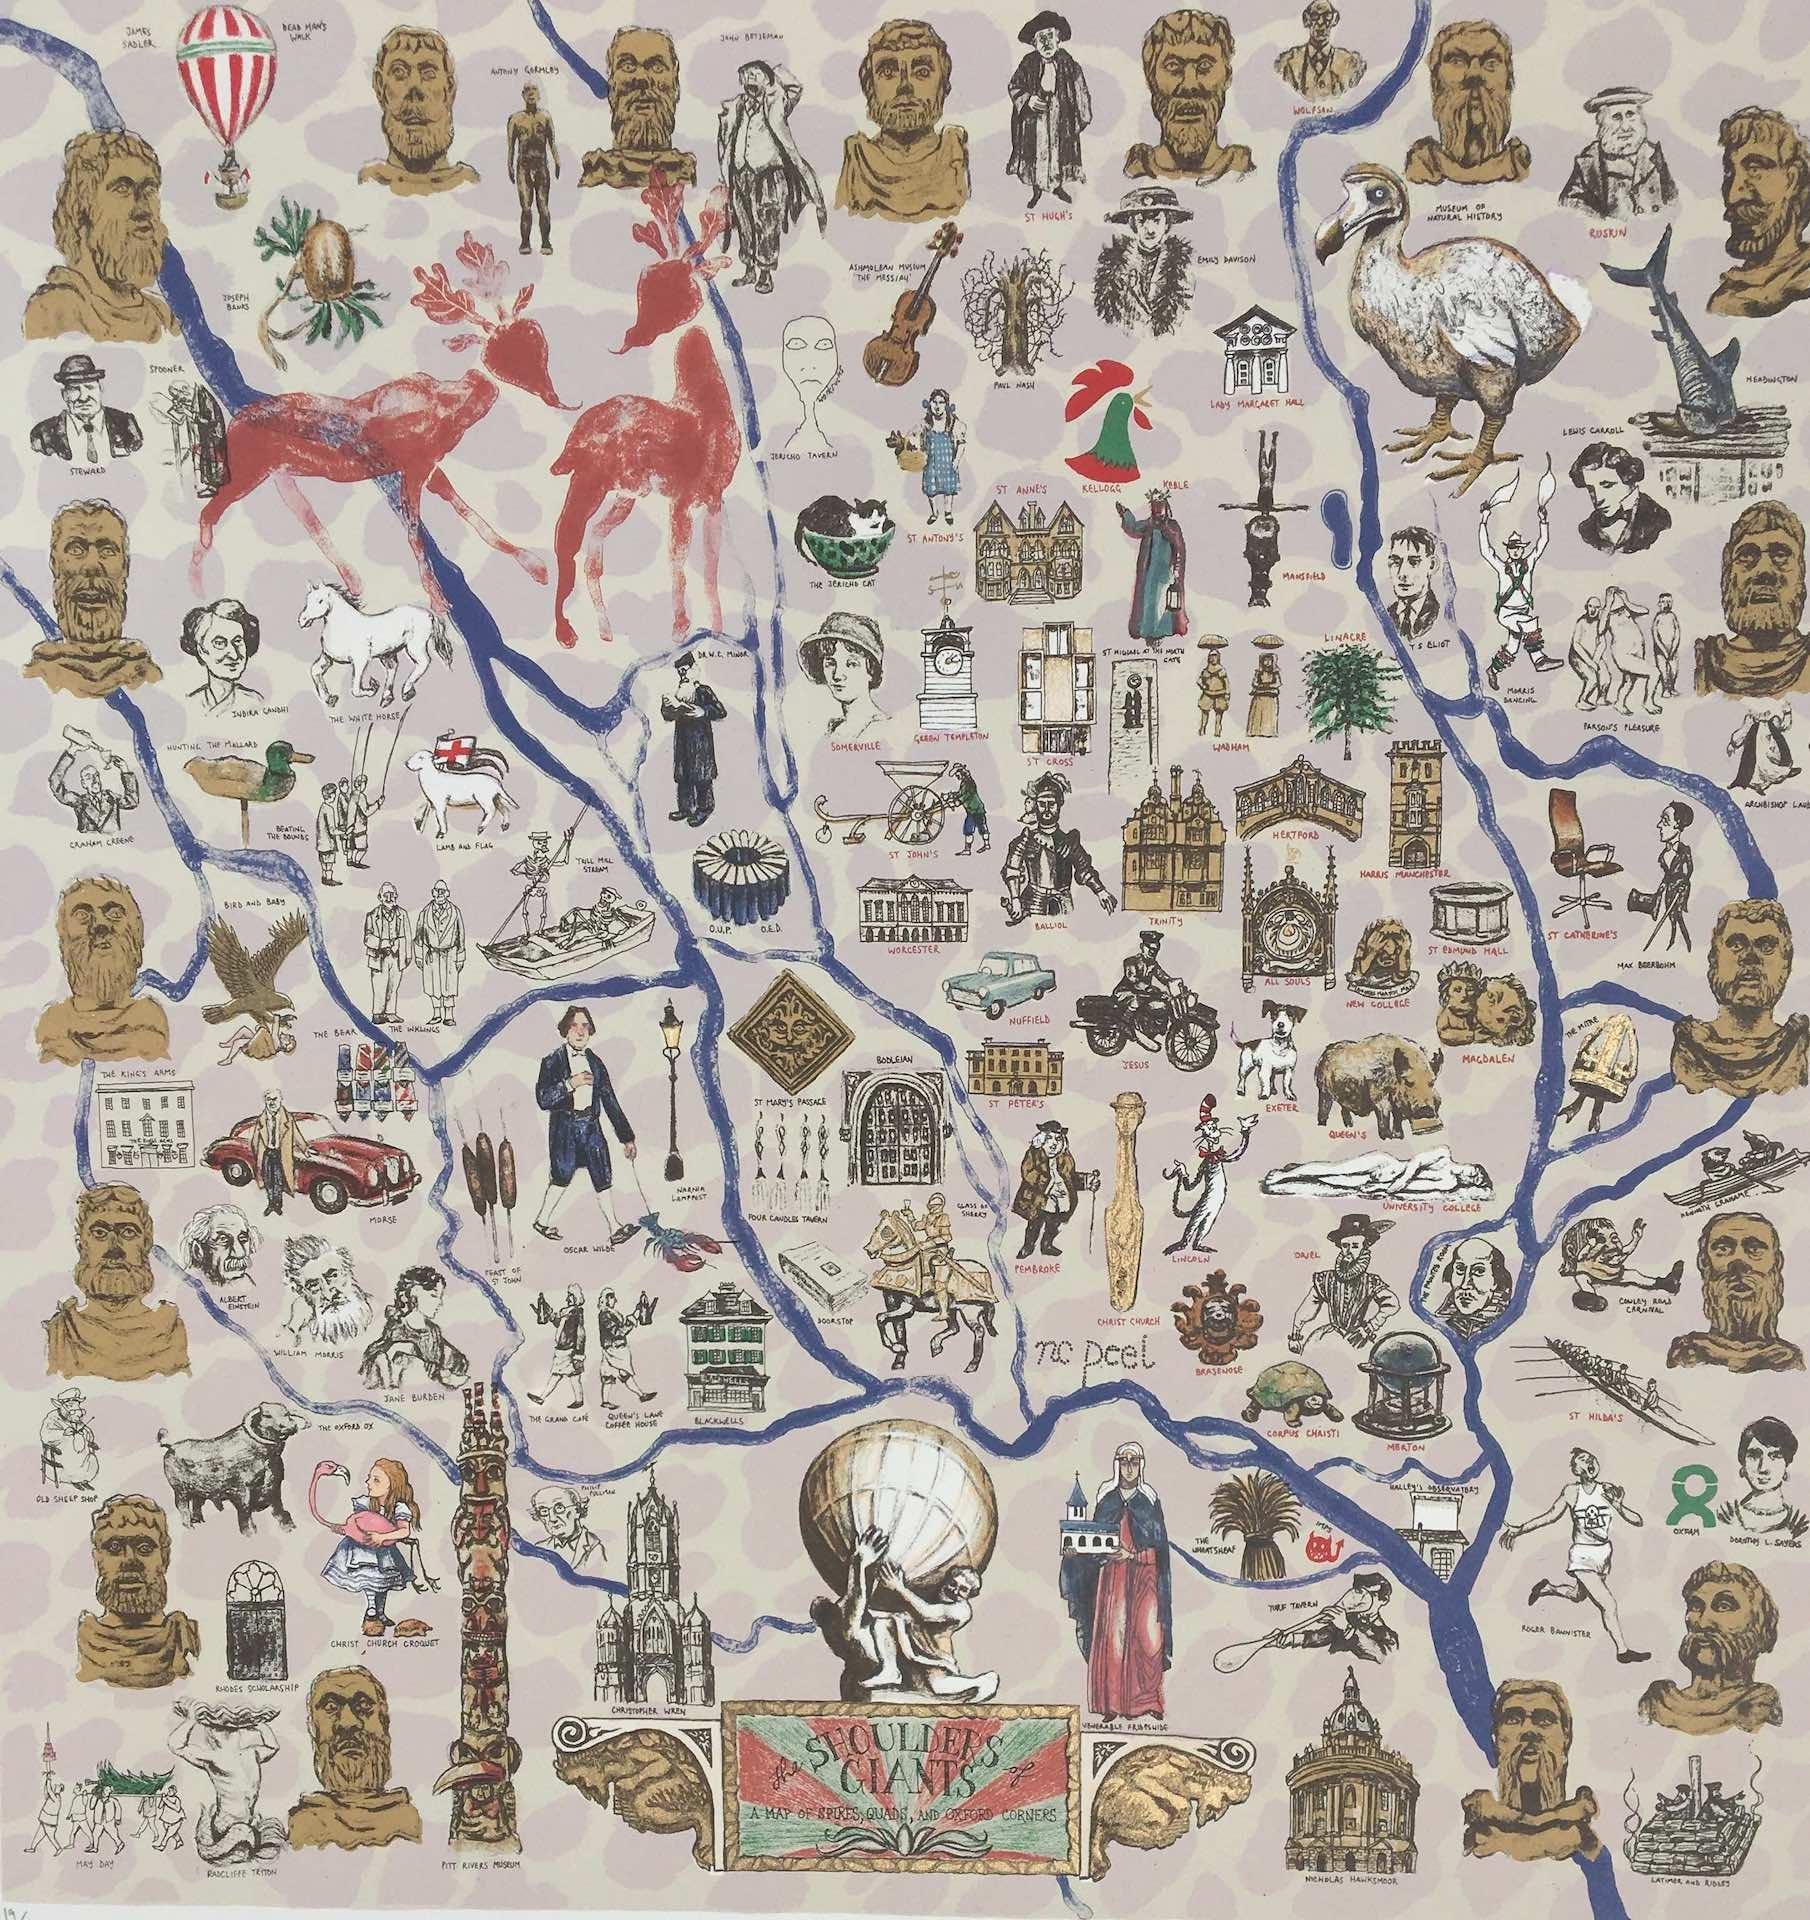 Mychael Barratt, On the Shoulders of Giants, Bright Illustrative Map of Oxford